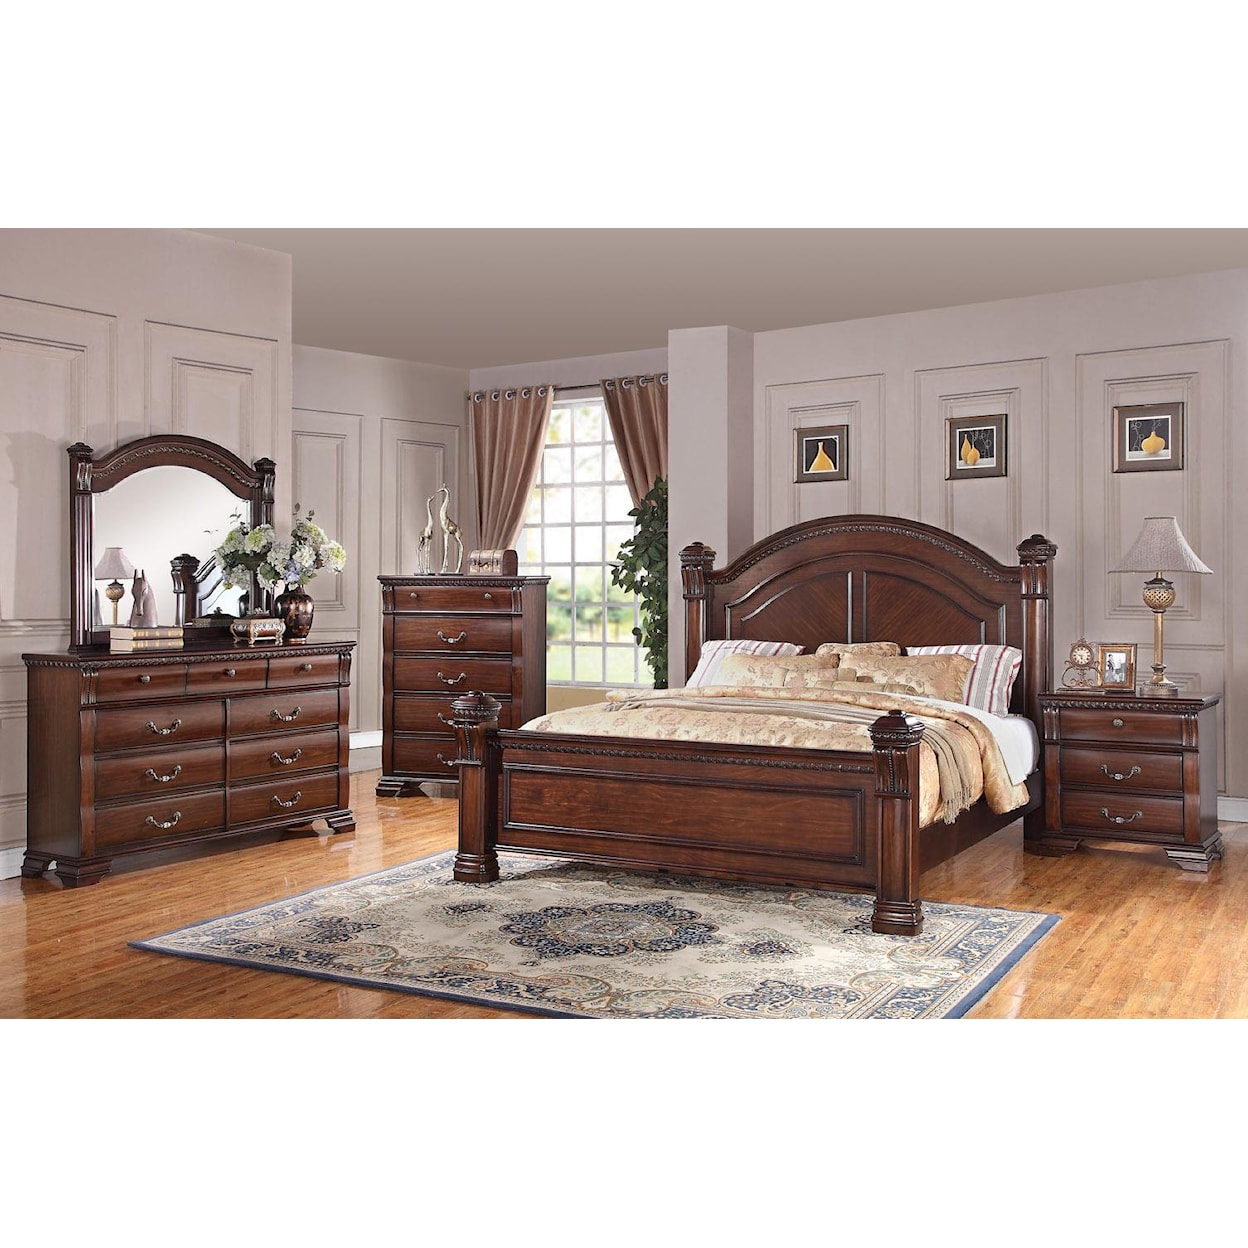 Austin Group Isabella Queen Bed